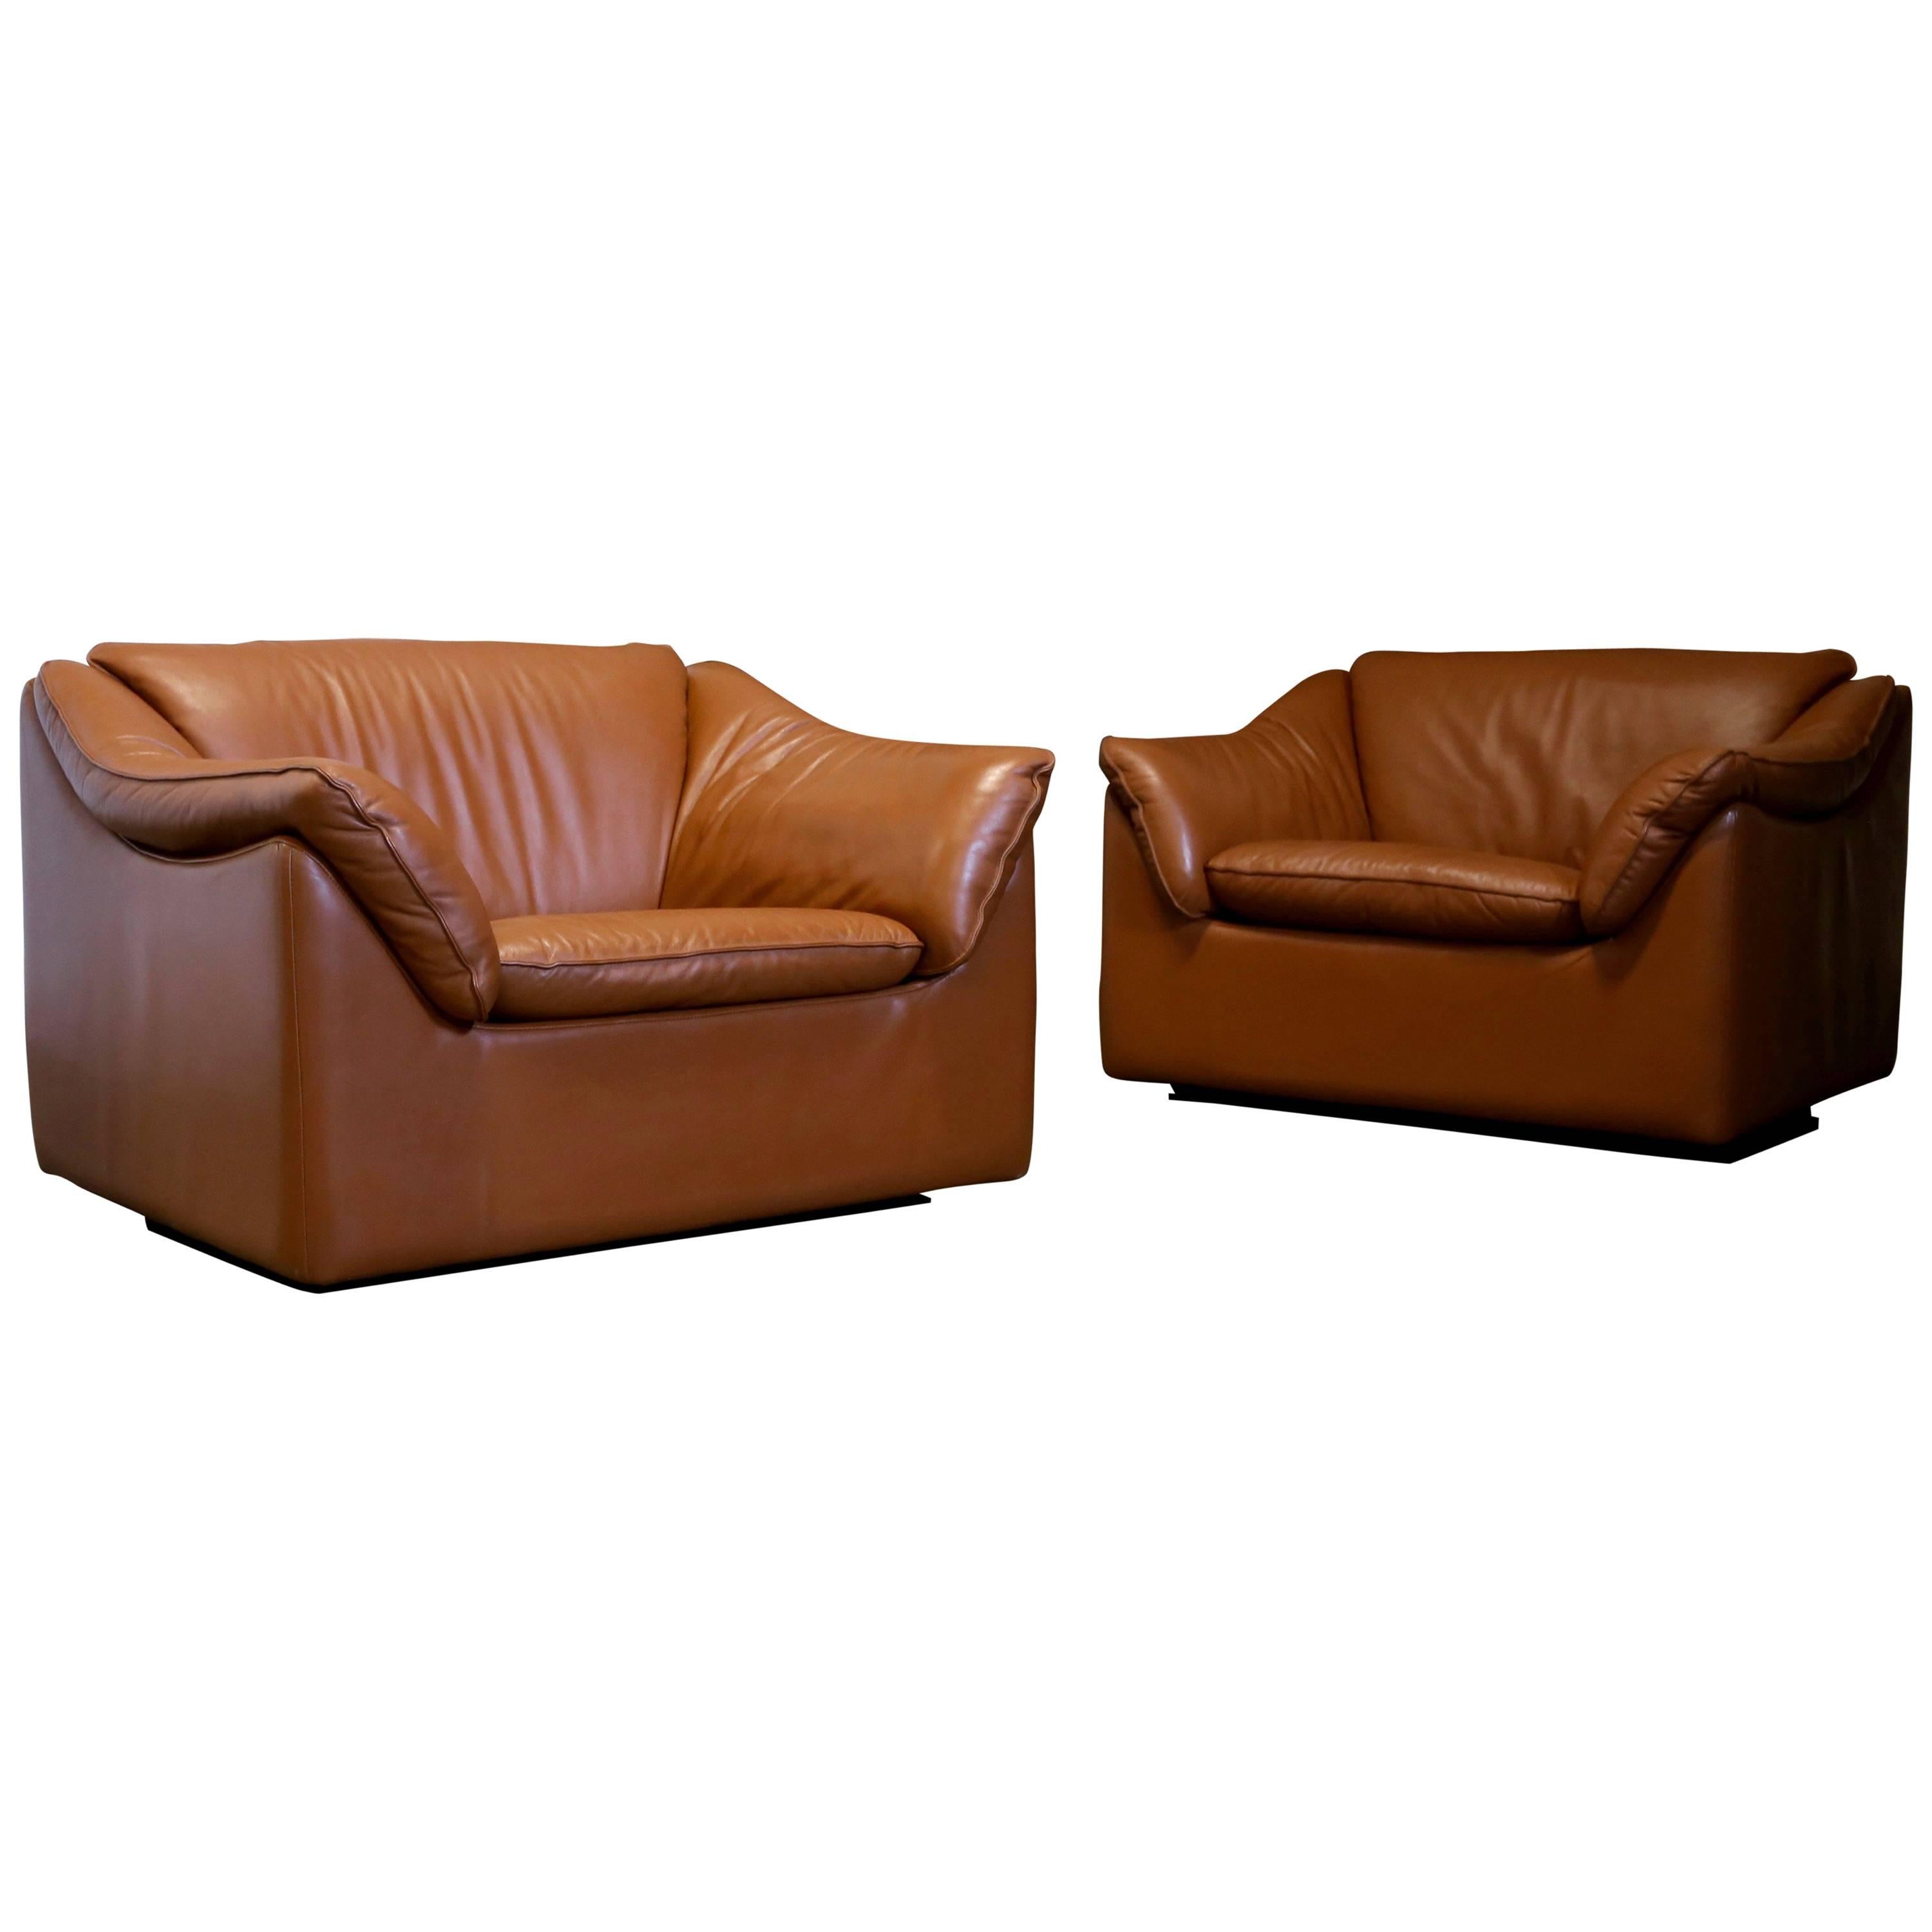 Pair of Leather Lounge Chairs by Metropolitan